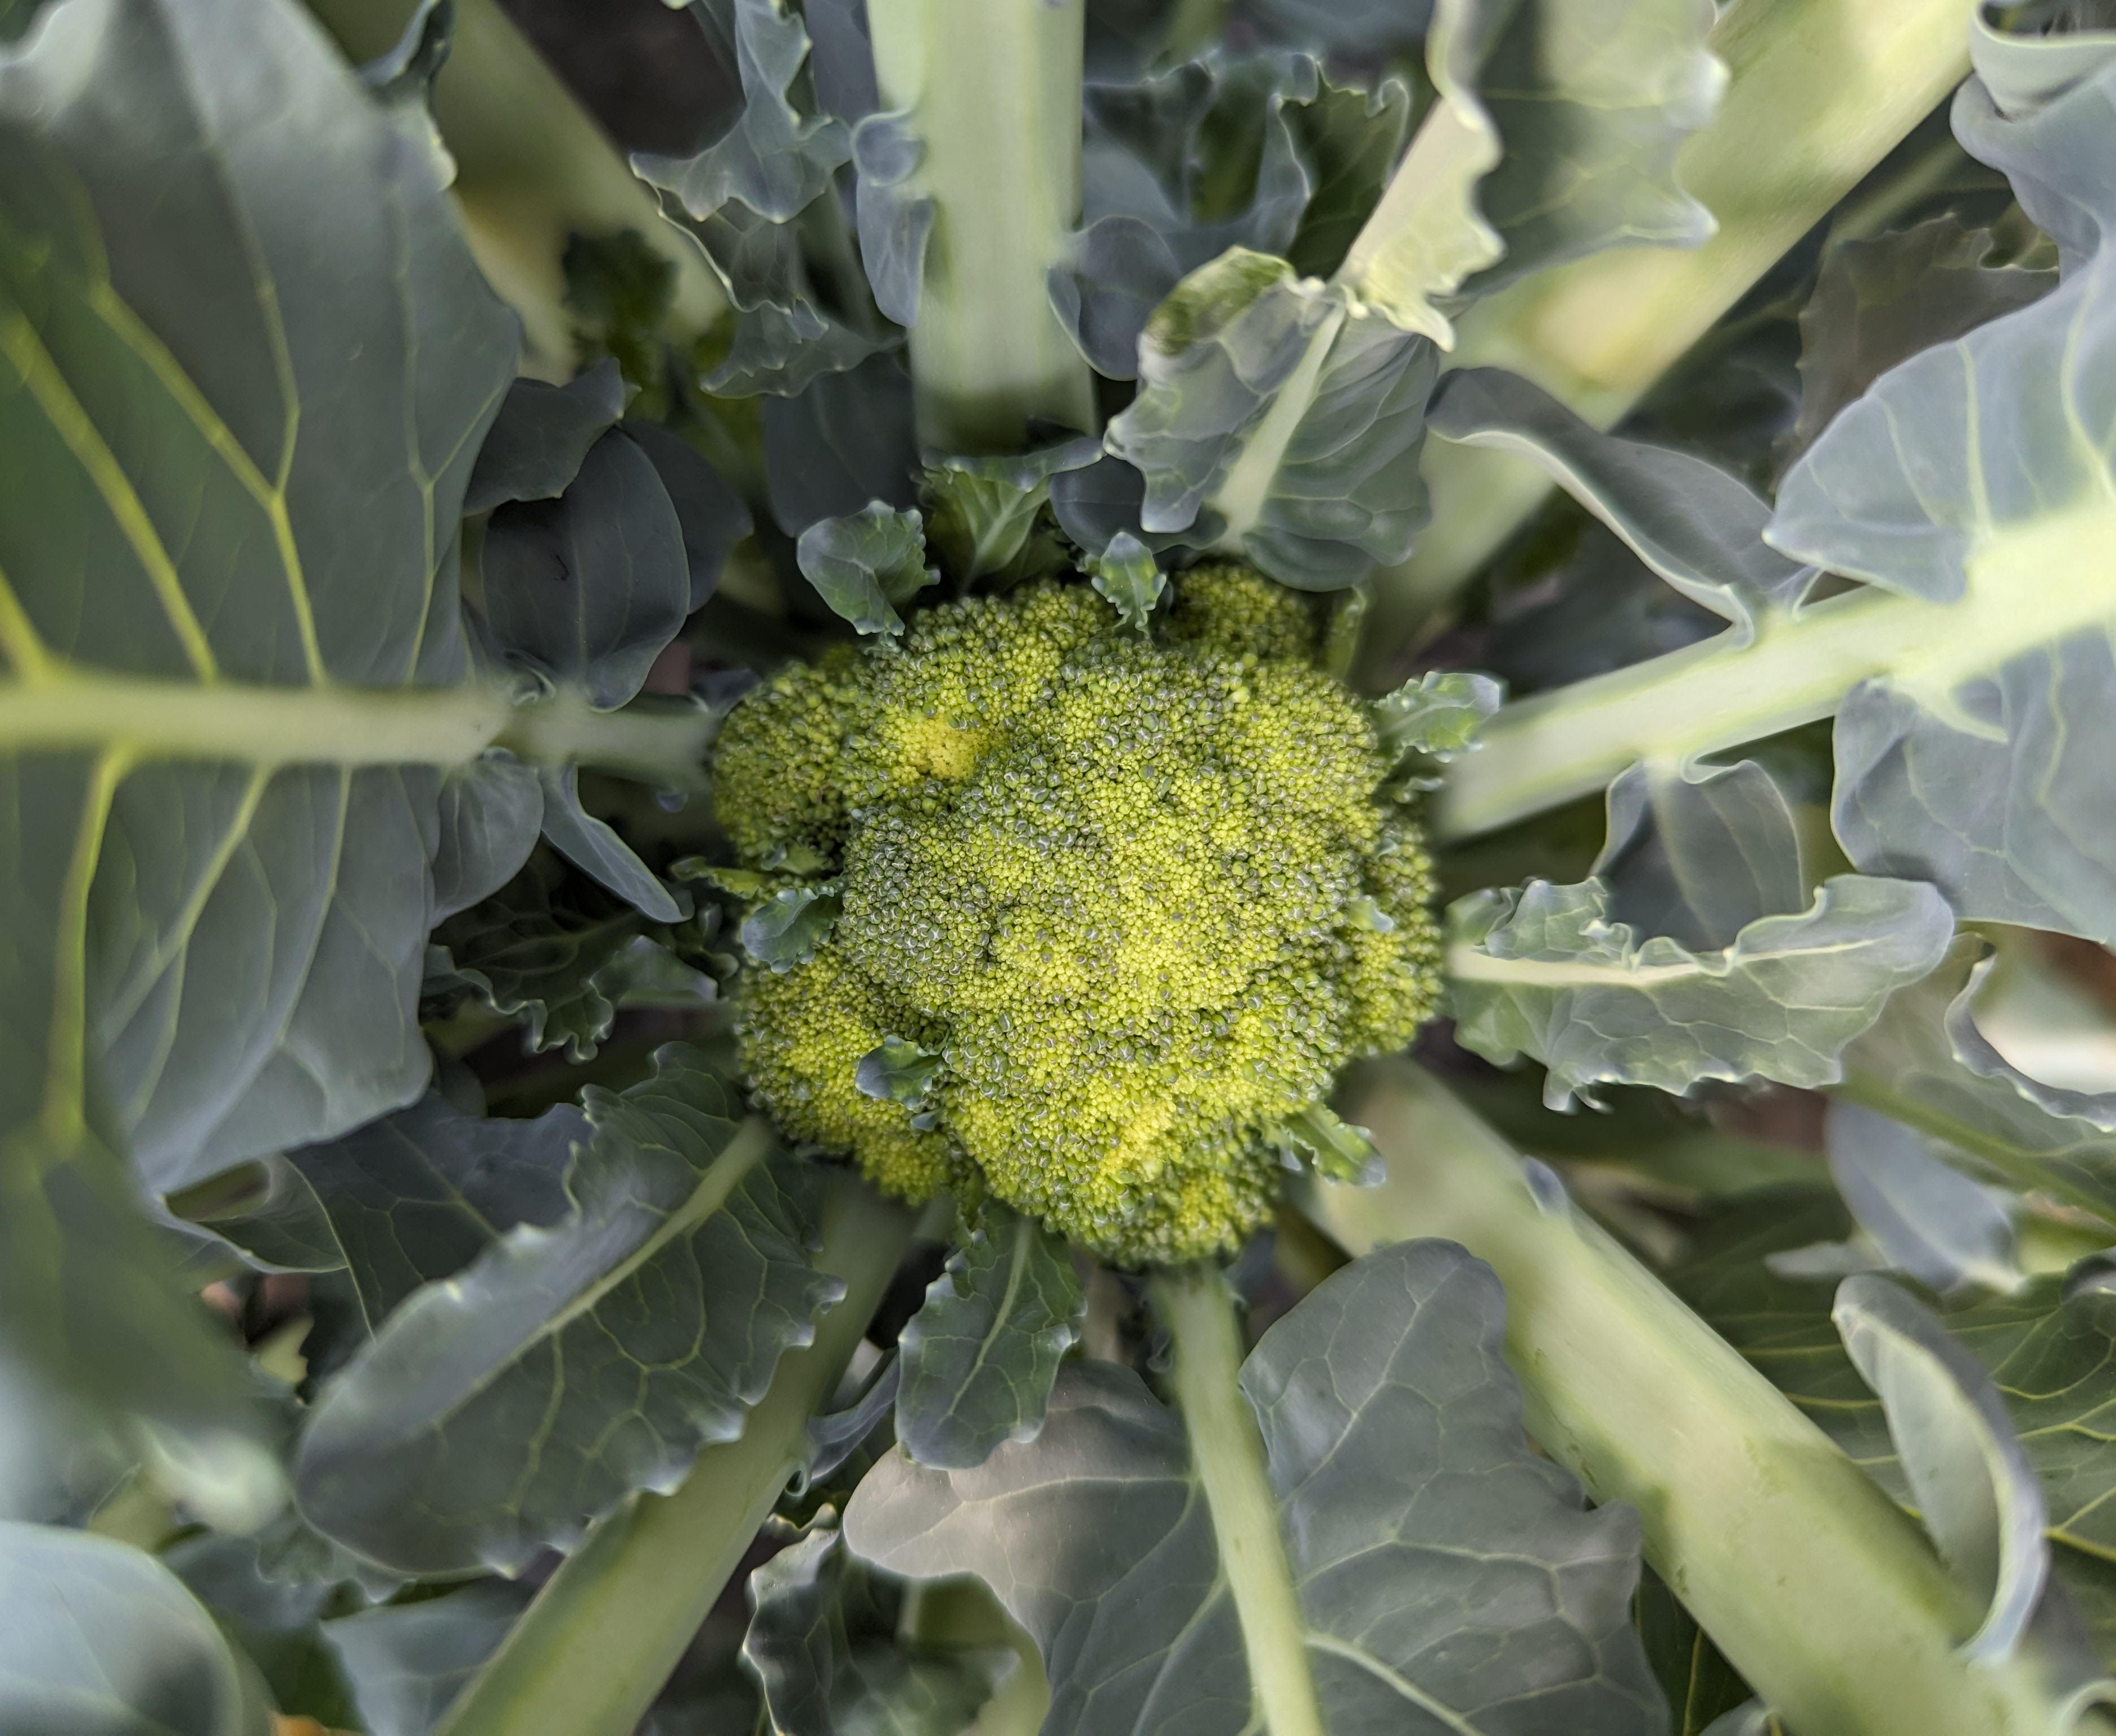 Broccoli showing signs of heat stress.